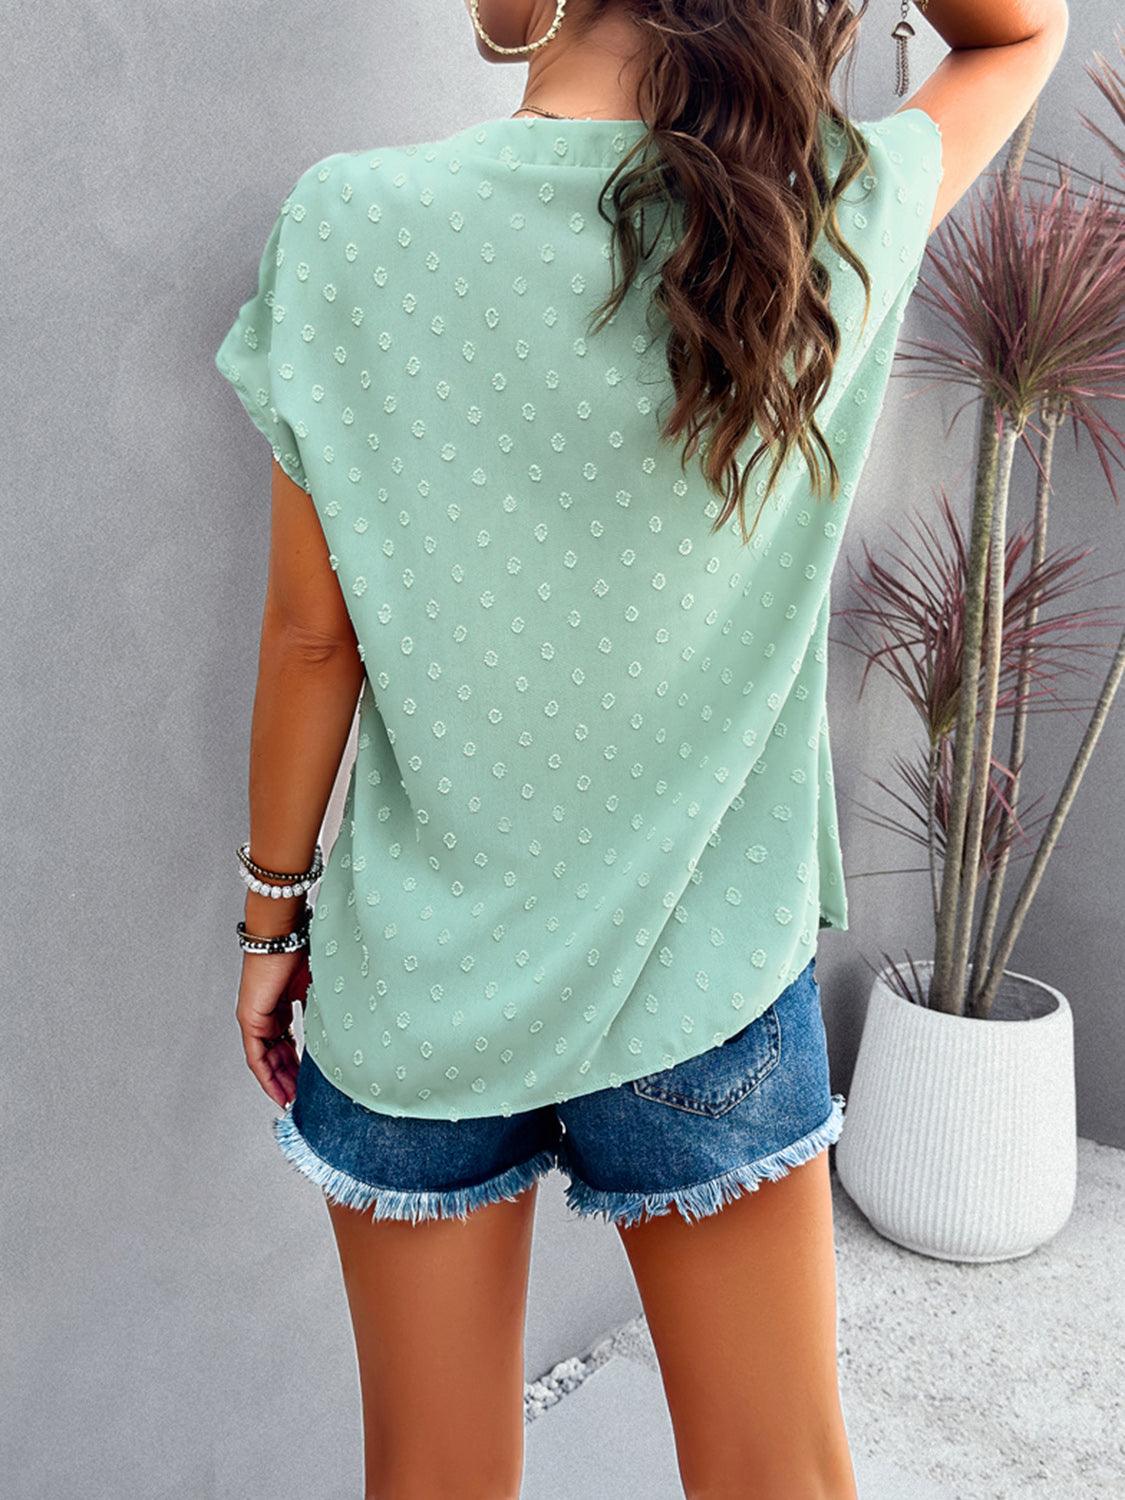 Swiss Dot Short Sleeve Blouse in 5 Colors - Olive Ave